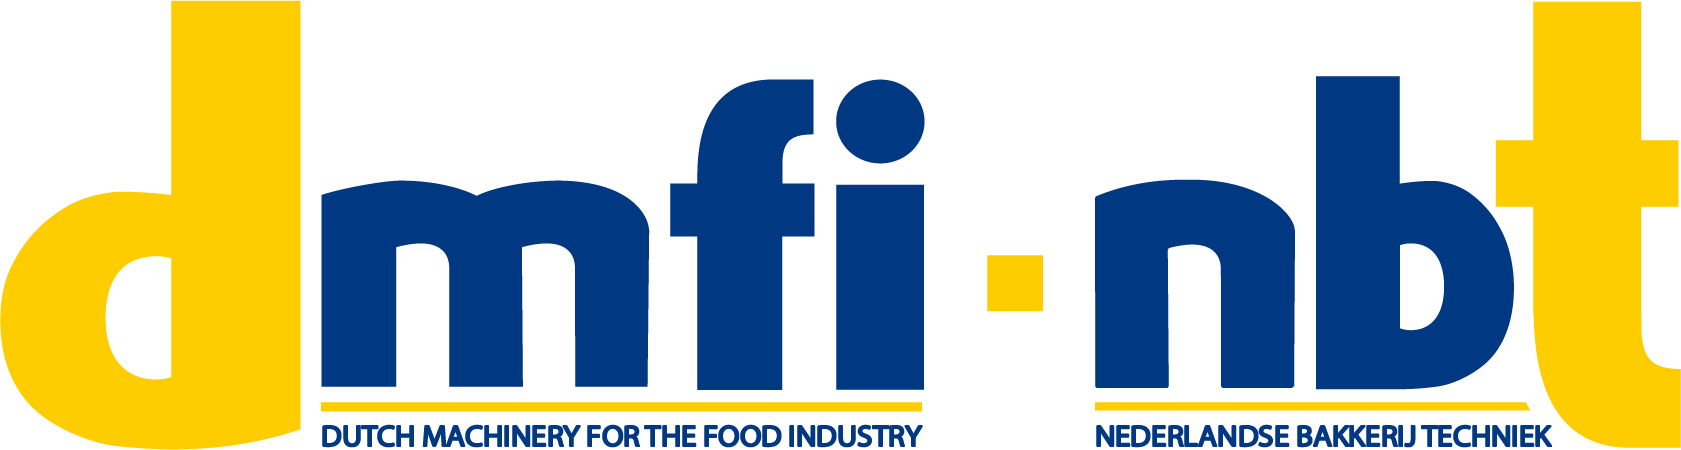 Dutch Machinery for the Food Industry